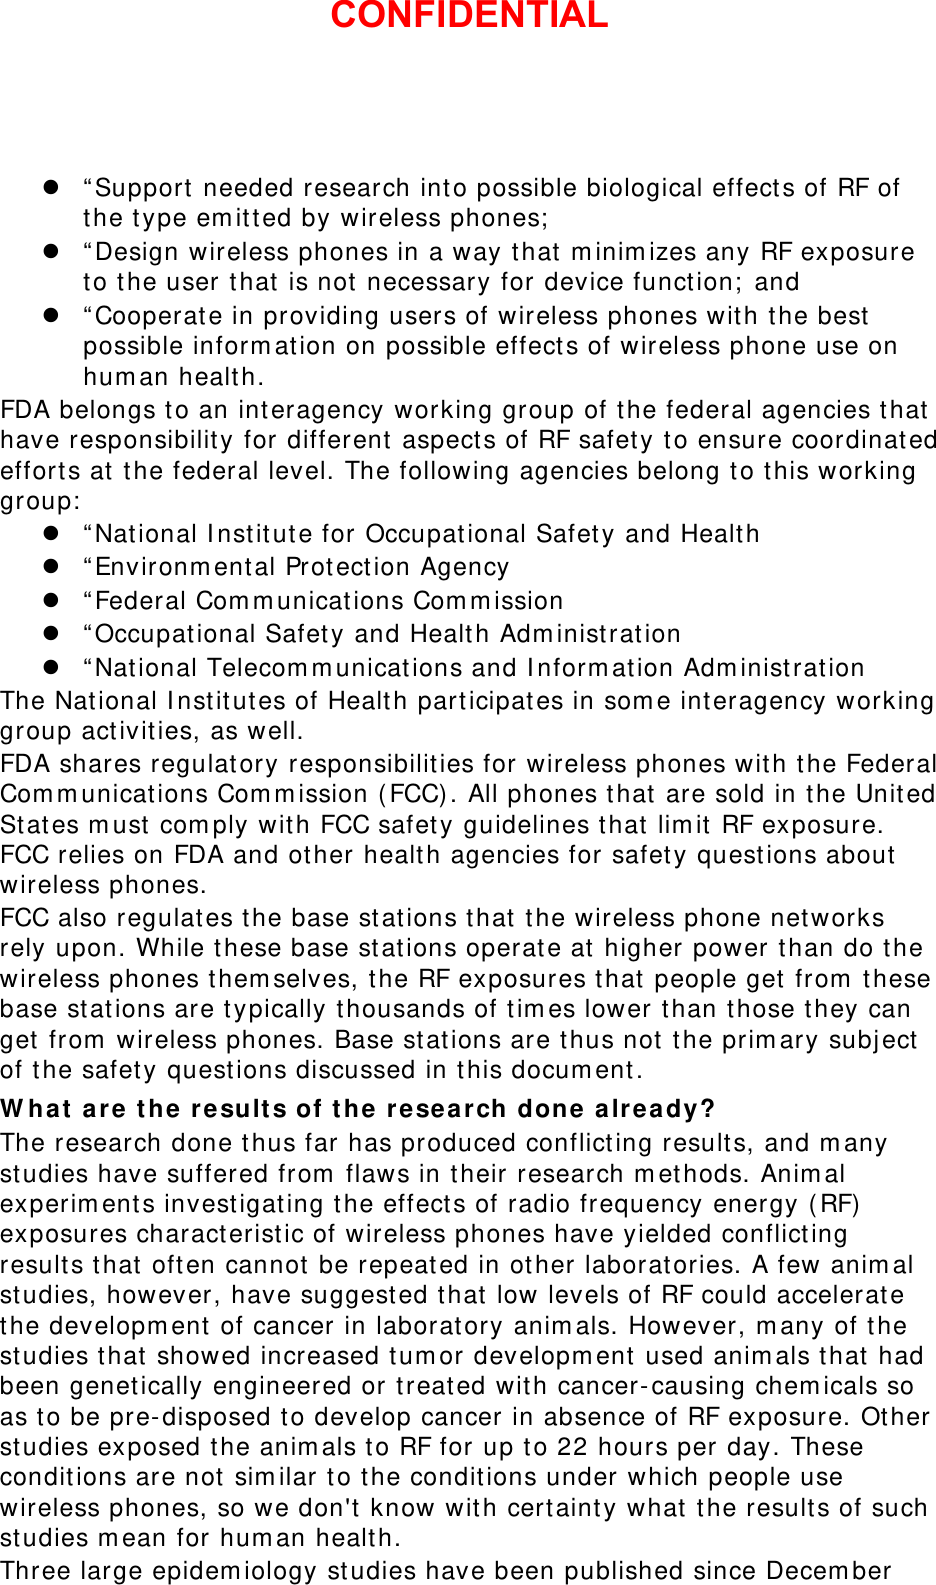  “Support needed research into possible biological effects of RF of the type emitted by wireless phones;  “Design wireless phones in a way that minimizes any RF exposure to the user that is not necessary for device function; and  “Cooperate in providing users of wireless phones with the best possible information on possible effects of wireless phone use on human health. FDA belongs to an interagency working group of the federal agencies that have responsibility for different aspects of RF safety to ensure coordinated efforts at the federal level. The following agencies belong to this working group:  “National Institute for Occupational Safety and Health  “Environmental Protection Agency  “Federal Communications Commission  “Occupational Safety and Health Administration  “National Telecommunications and Information Administration The National Institutes of Health participates in some interagency working group activities, as well. FDA shares regulatory responsibilities for wireless phones with the Federal Communications Commission (FCC). All phones that are sold in the United States must comply with FCC safety guidelines that limit RF exposure. FCC relies on FDA and other health agencies for safety questions about wireless phones. FCC also regulates the base stations that the wireless phone networks rely upon. While these base stations operate at higher power than do the wireless phones themselves, the RF exposures that people get from these base stations are typically thousands of times lower than those they can get from wireless phones. Base stations are thus not the primary subject of the safety questions discussed in this document. What are the results of the research done already? The research done thus far has produced conflicting results, and many studies have suffered from flaws in their research methods. Animal experiments investigating the effects of radio frequency energy (RF) exposures characteristic of wireless phones have yielded conflicting results that often cannot be repeated in other laboratories. A few animal studies, however, have suggested that low levels of RF could accelerate the development of cancer in laboratory animals. However, many of the studies that showed increased tumor development used animals that had been genetically engineered or treated with cancer-causing chemicals so as to be pre-disposed to develop cancer in absence of RF exposure. Other studies exposed the animals to RF for up to 22 hours per day. These conditions are not similar to the conditions under which people use wireless phones, so we don&apos;t know with certainty what the results of such studies mean for human health. Three large epidemiology studies have been published since December CONFIDENTIAL